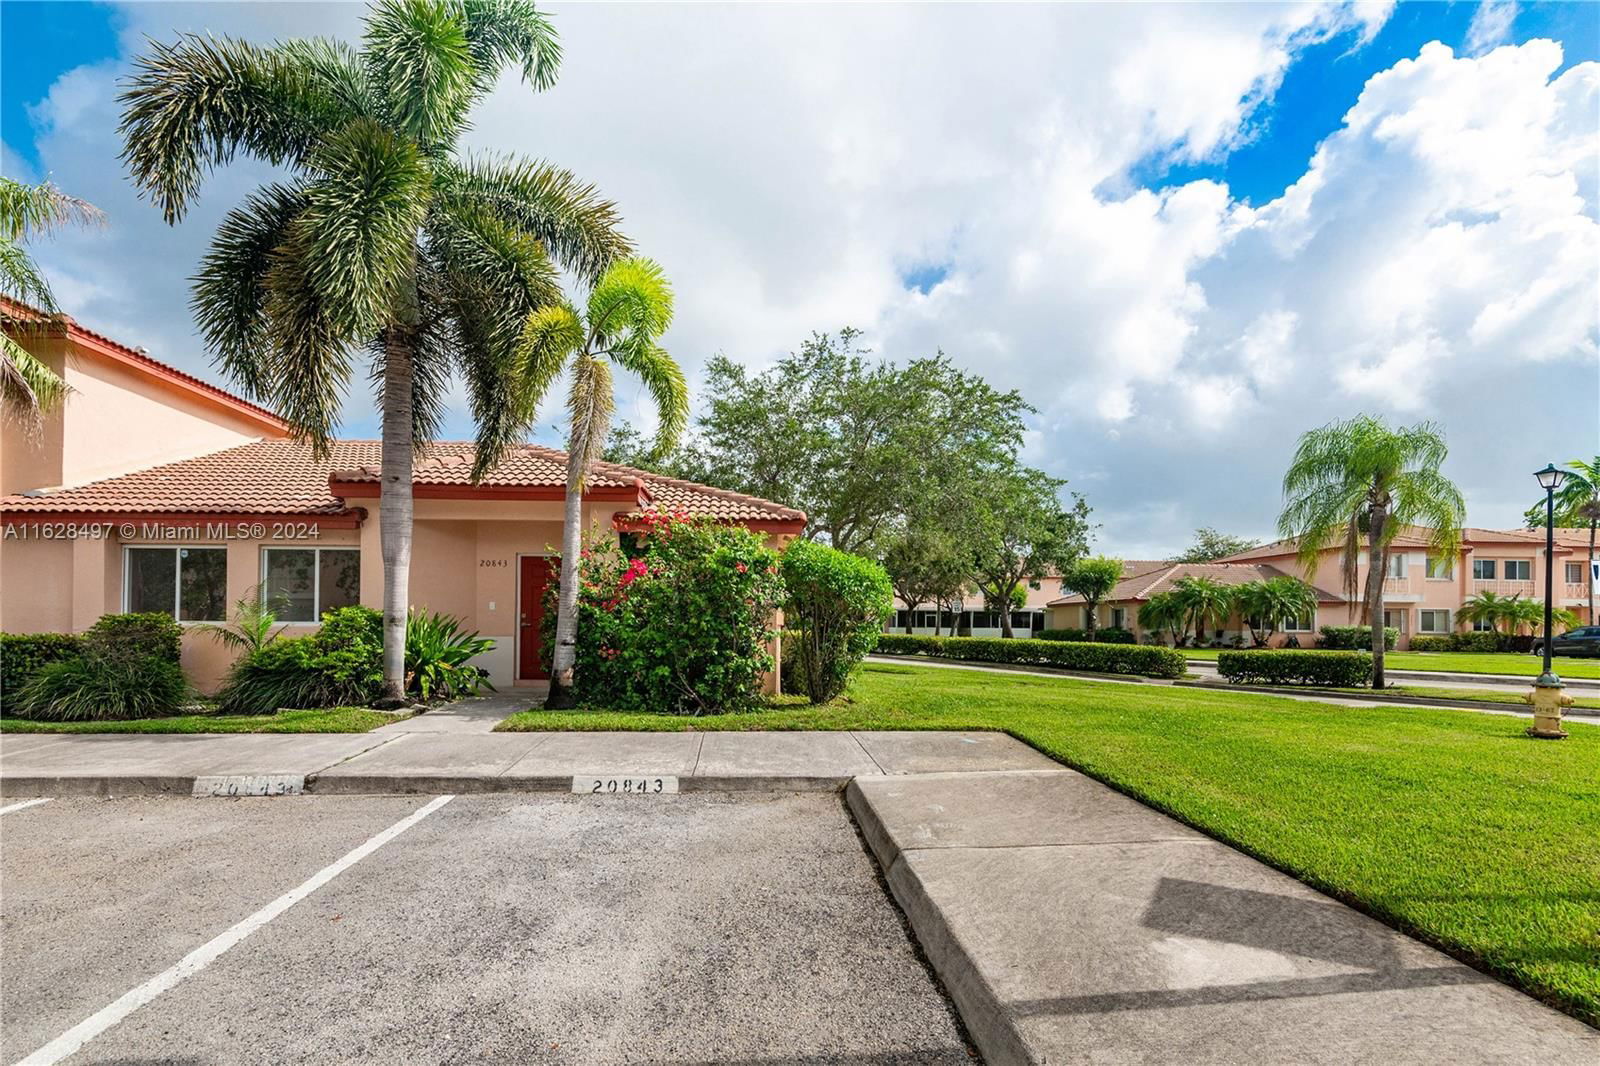 Real estate property located at 20843 3rd Ct #1, Broward County, CHAPEL TRAIL II, Pembroke Pines, FL